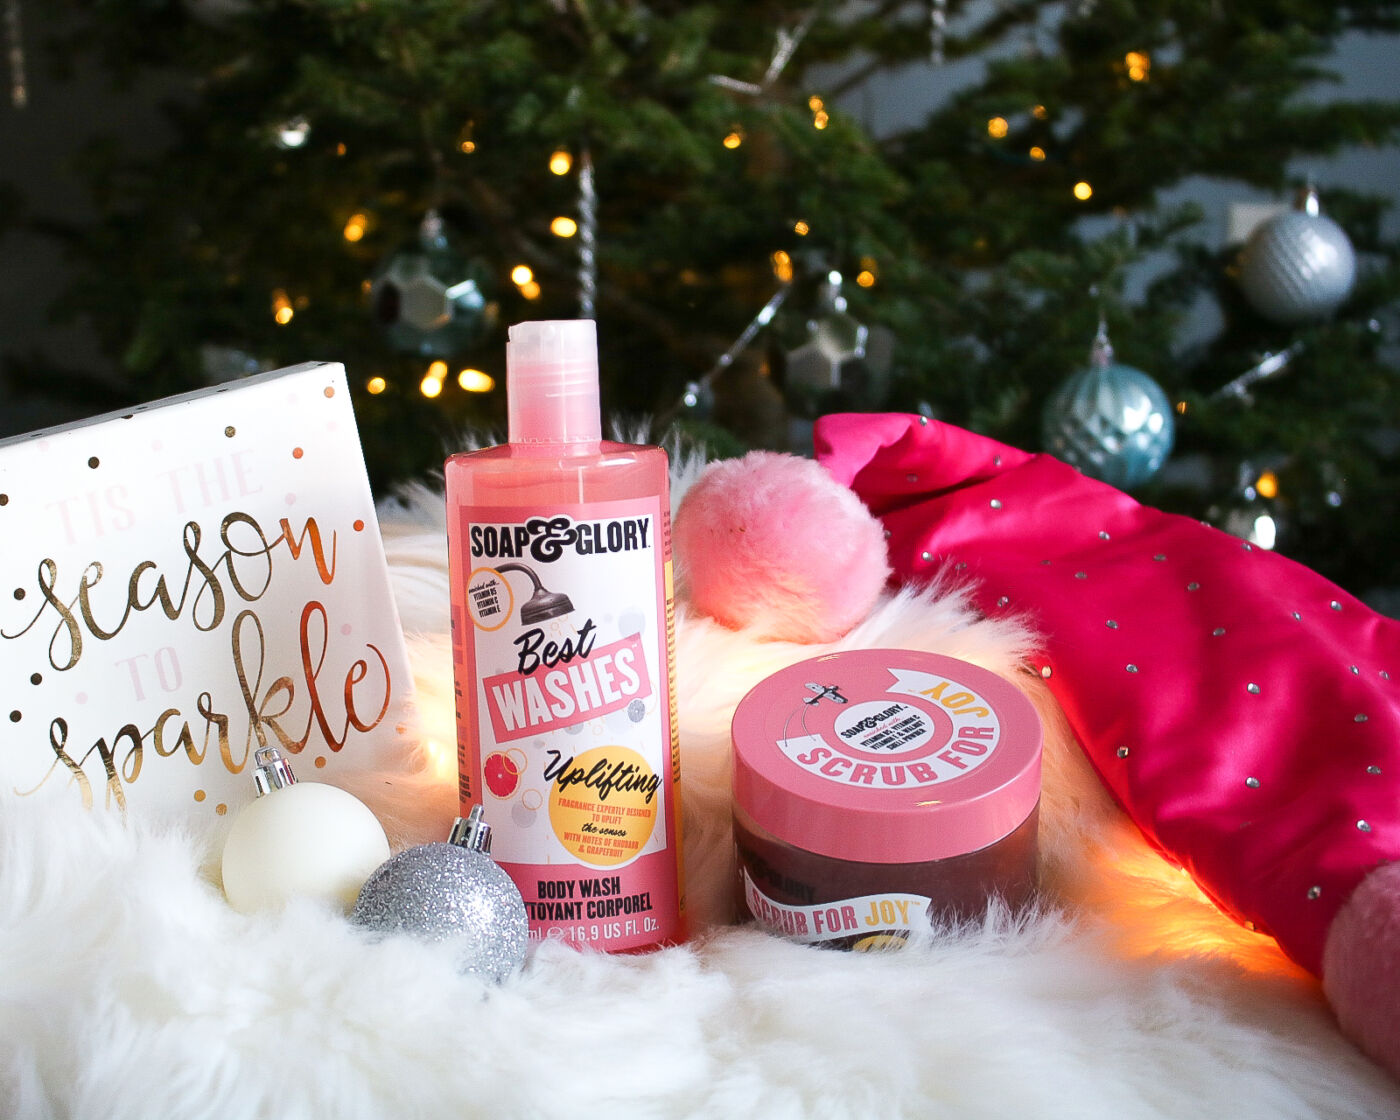 soap & glory best washes, scrub for joy holiday products